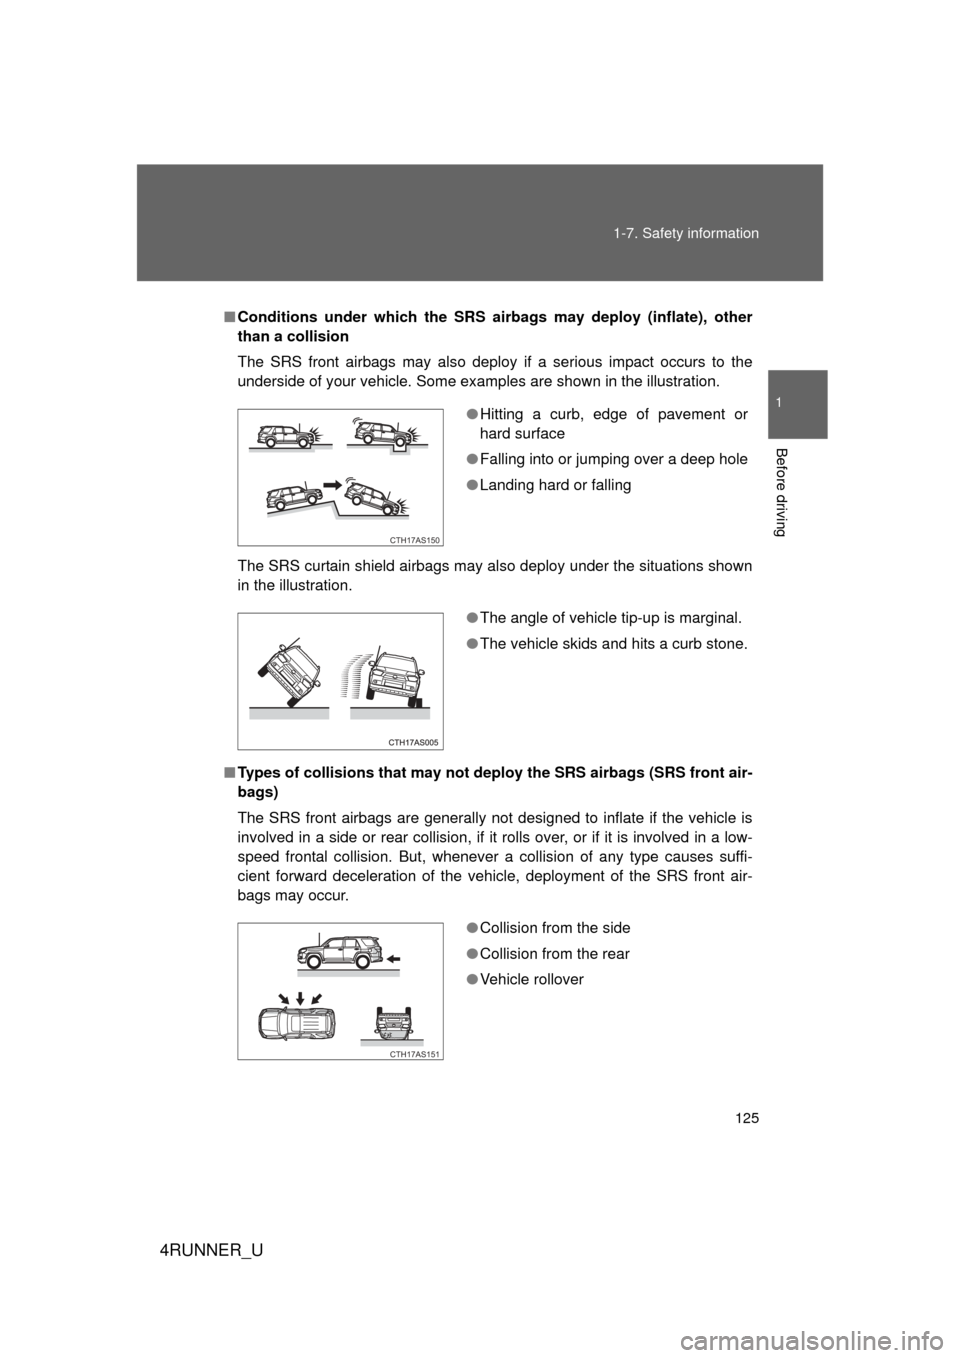 TOYOTA 4RUNNER 2012 N280 / 5.G Owners Manual 125
1-7. Safety information
1
Before driving
4RUNNER_U
■
Conditions under which the SRS airbags may deploy (inflate), other
than a collision
The SRS front airbags may also deploy if a serious impact